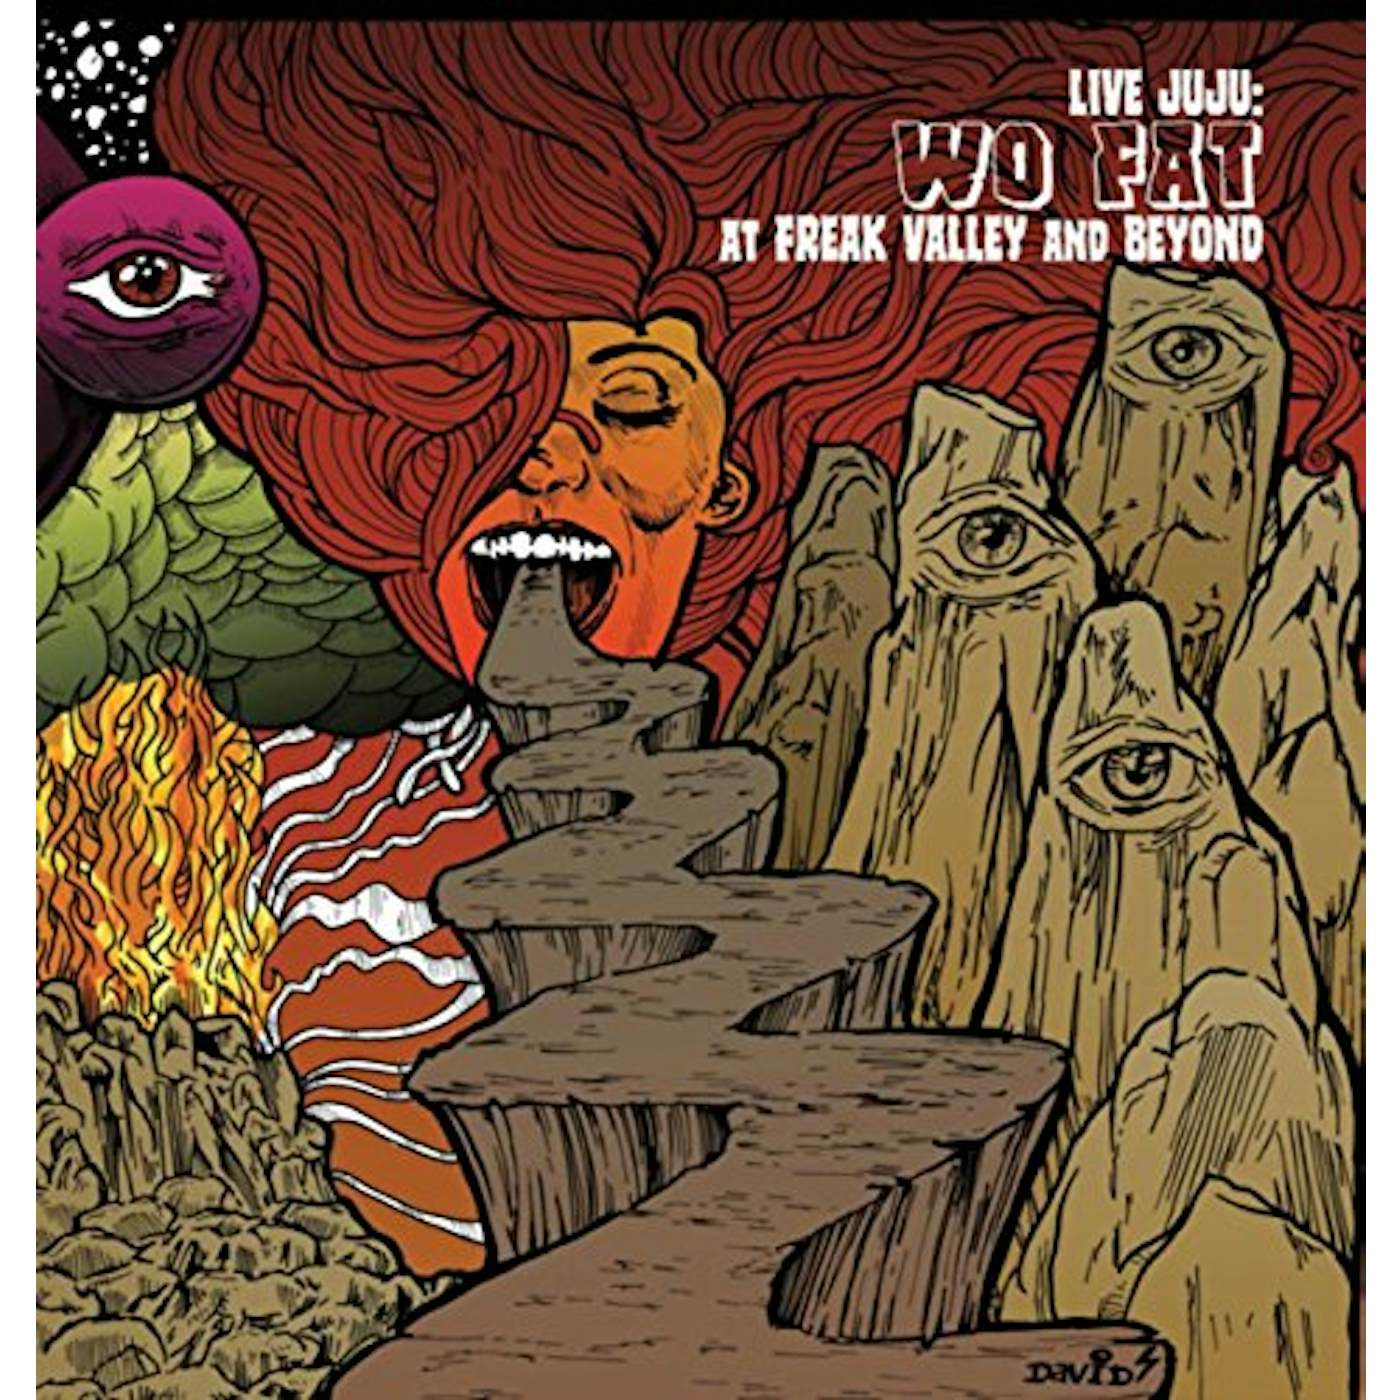 Wo Fat LIVE JUJU: FREAK VALLEY AND BEYOND CD